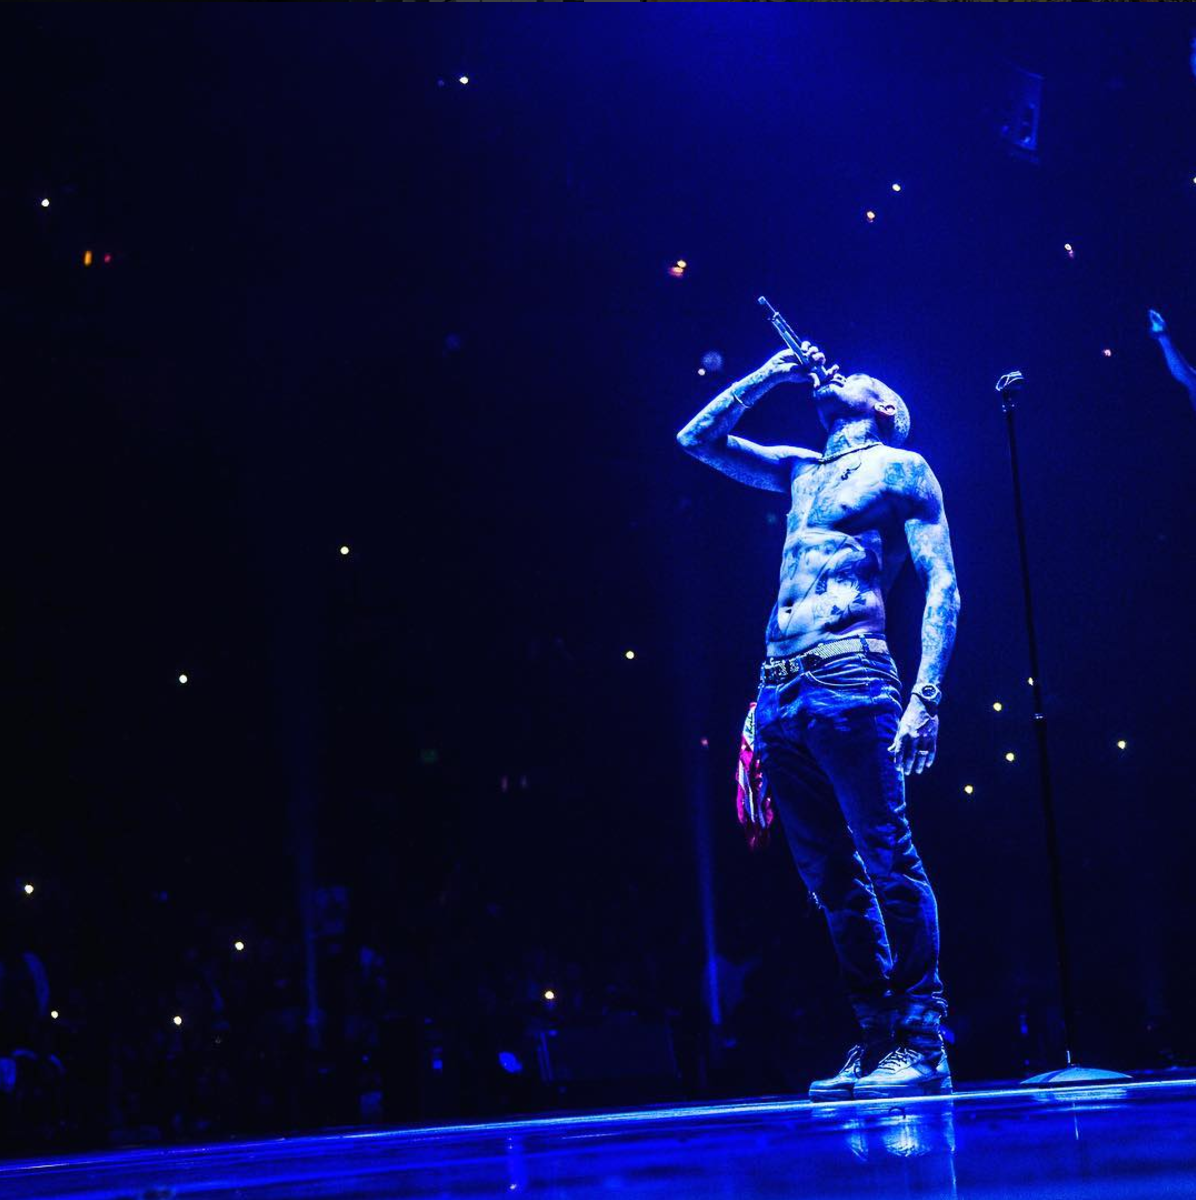 Chris Brown Kicks Off "The Party Tour" in Baltimore